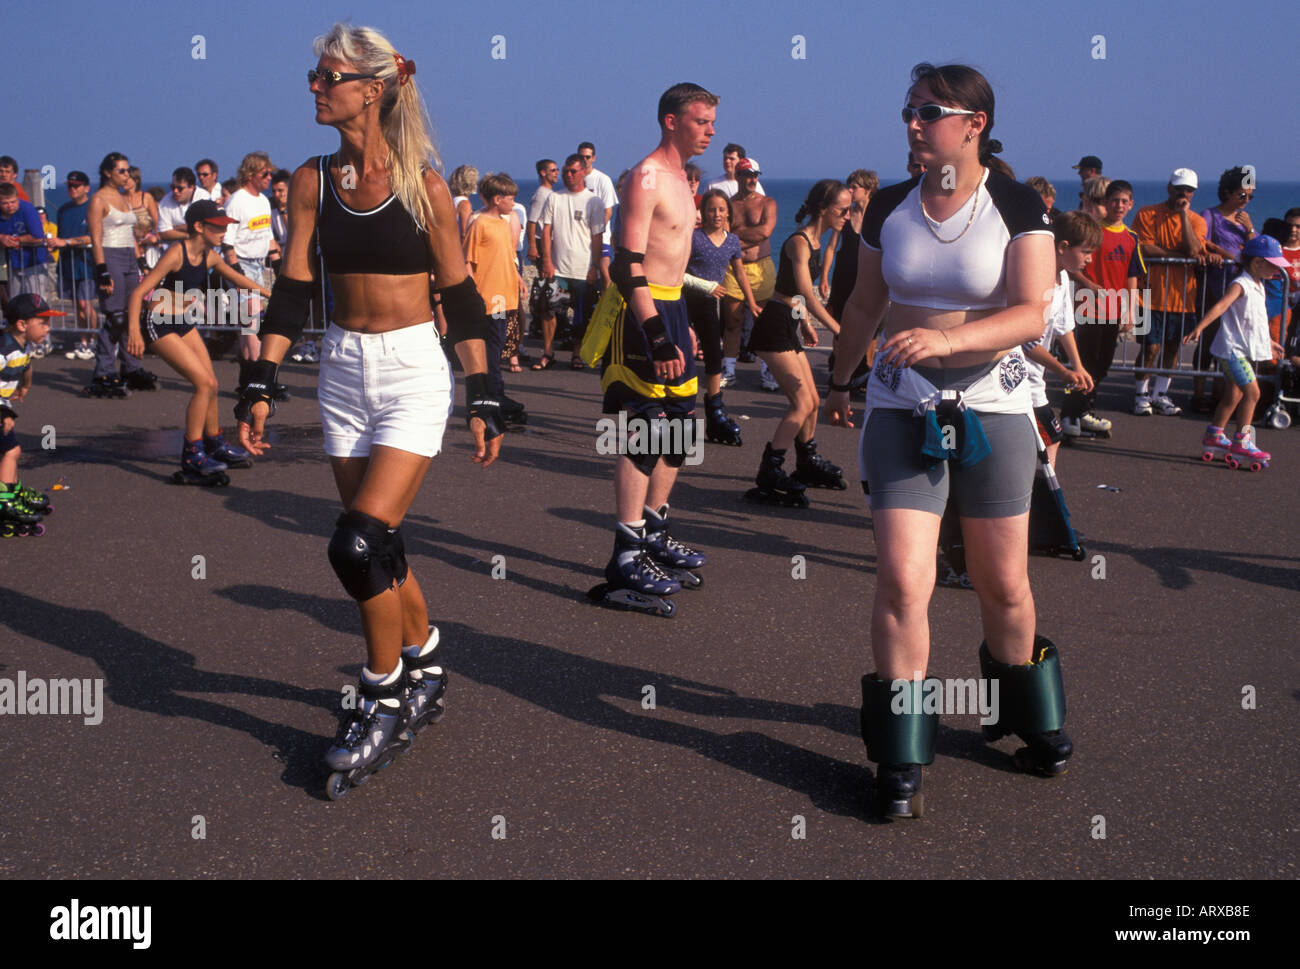 Dancing on roller skates 1990s UK. Group young people roller skating Eastbourne England circa 1995 HOMER SYKES Stock Photo